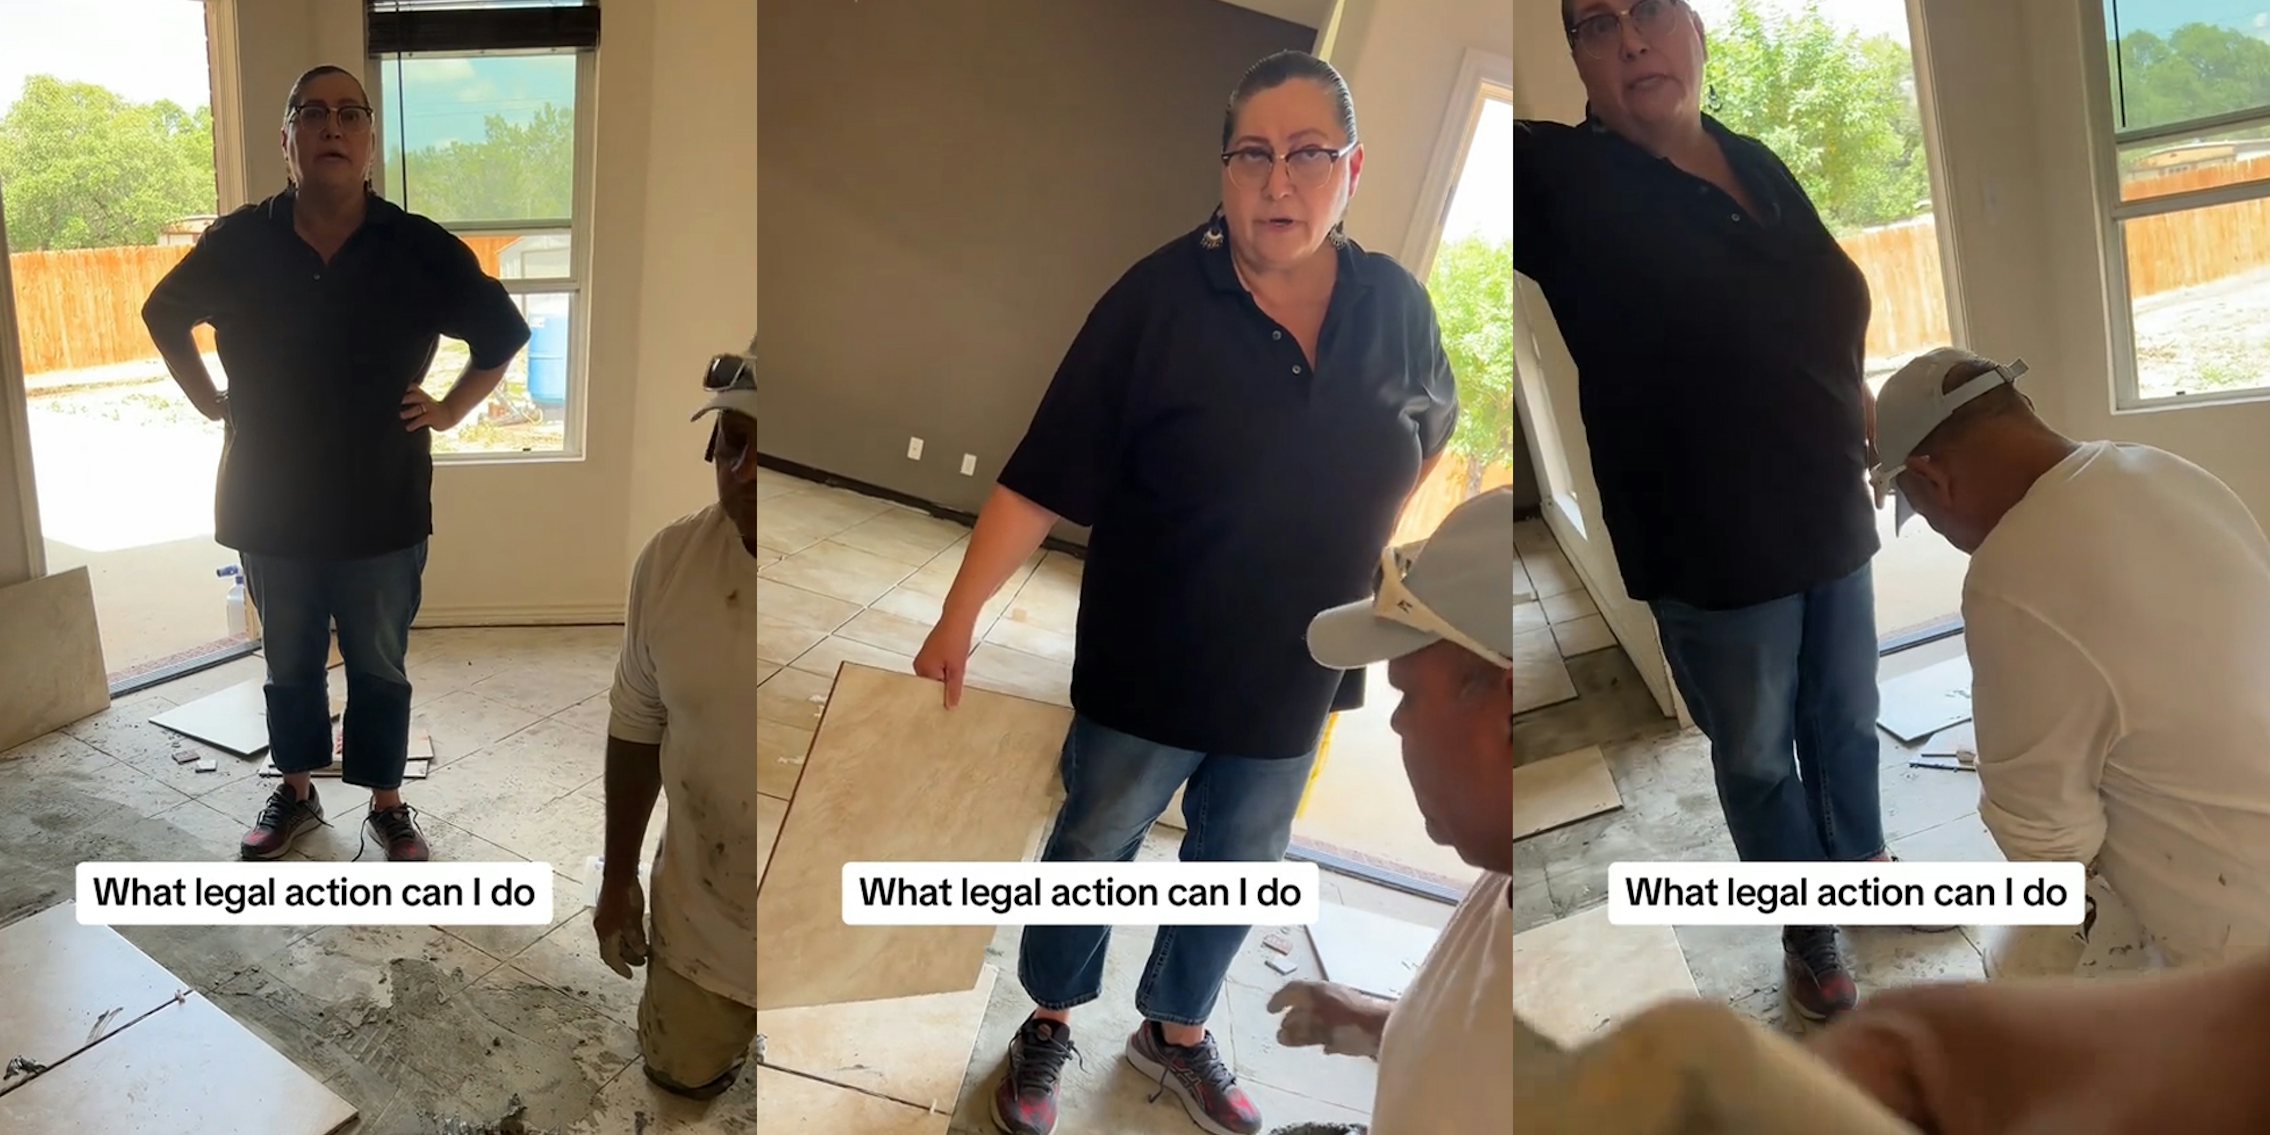 home owner speaking to workers in kitchen with caption 'What legal action can I do' (l) home owner speaking to workers in kitchen with caption 'What legal action can I do' (c) home owner speaking to workers in kitchen with caption 'What legal action can I do' (r)